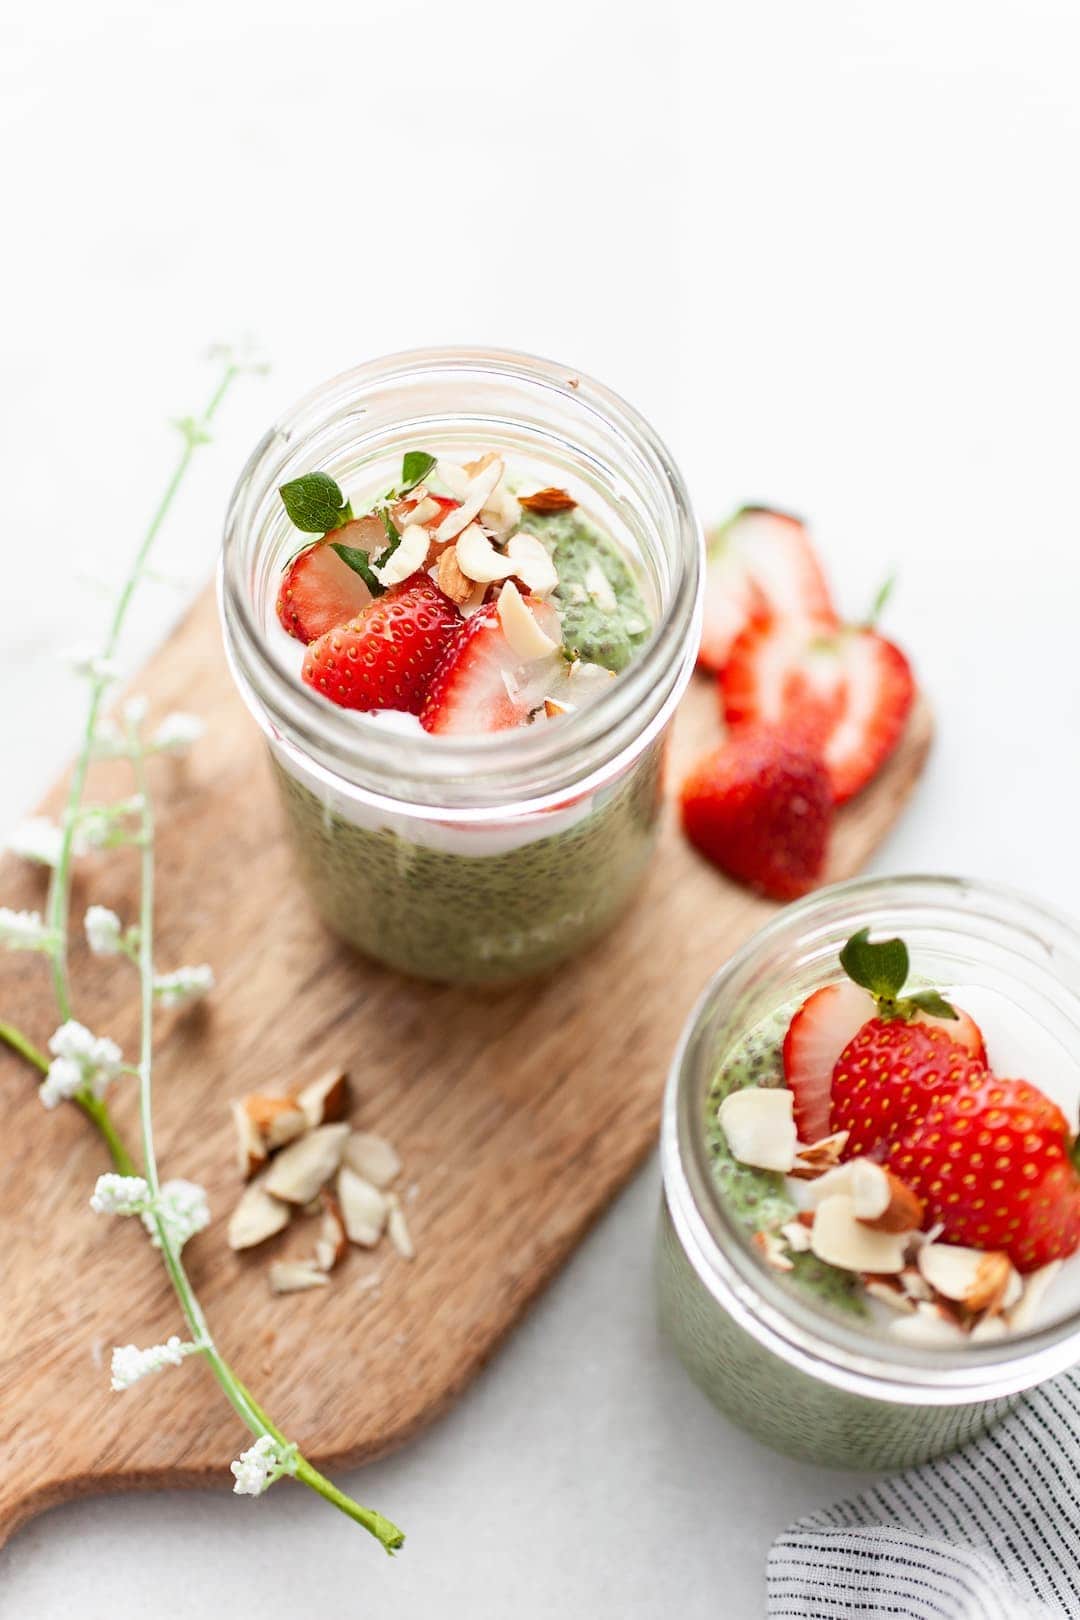 Matcha Chia Pudding - 18 Delicious Low Fodmap Snacks